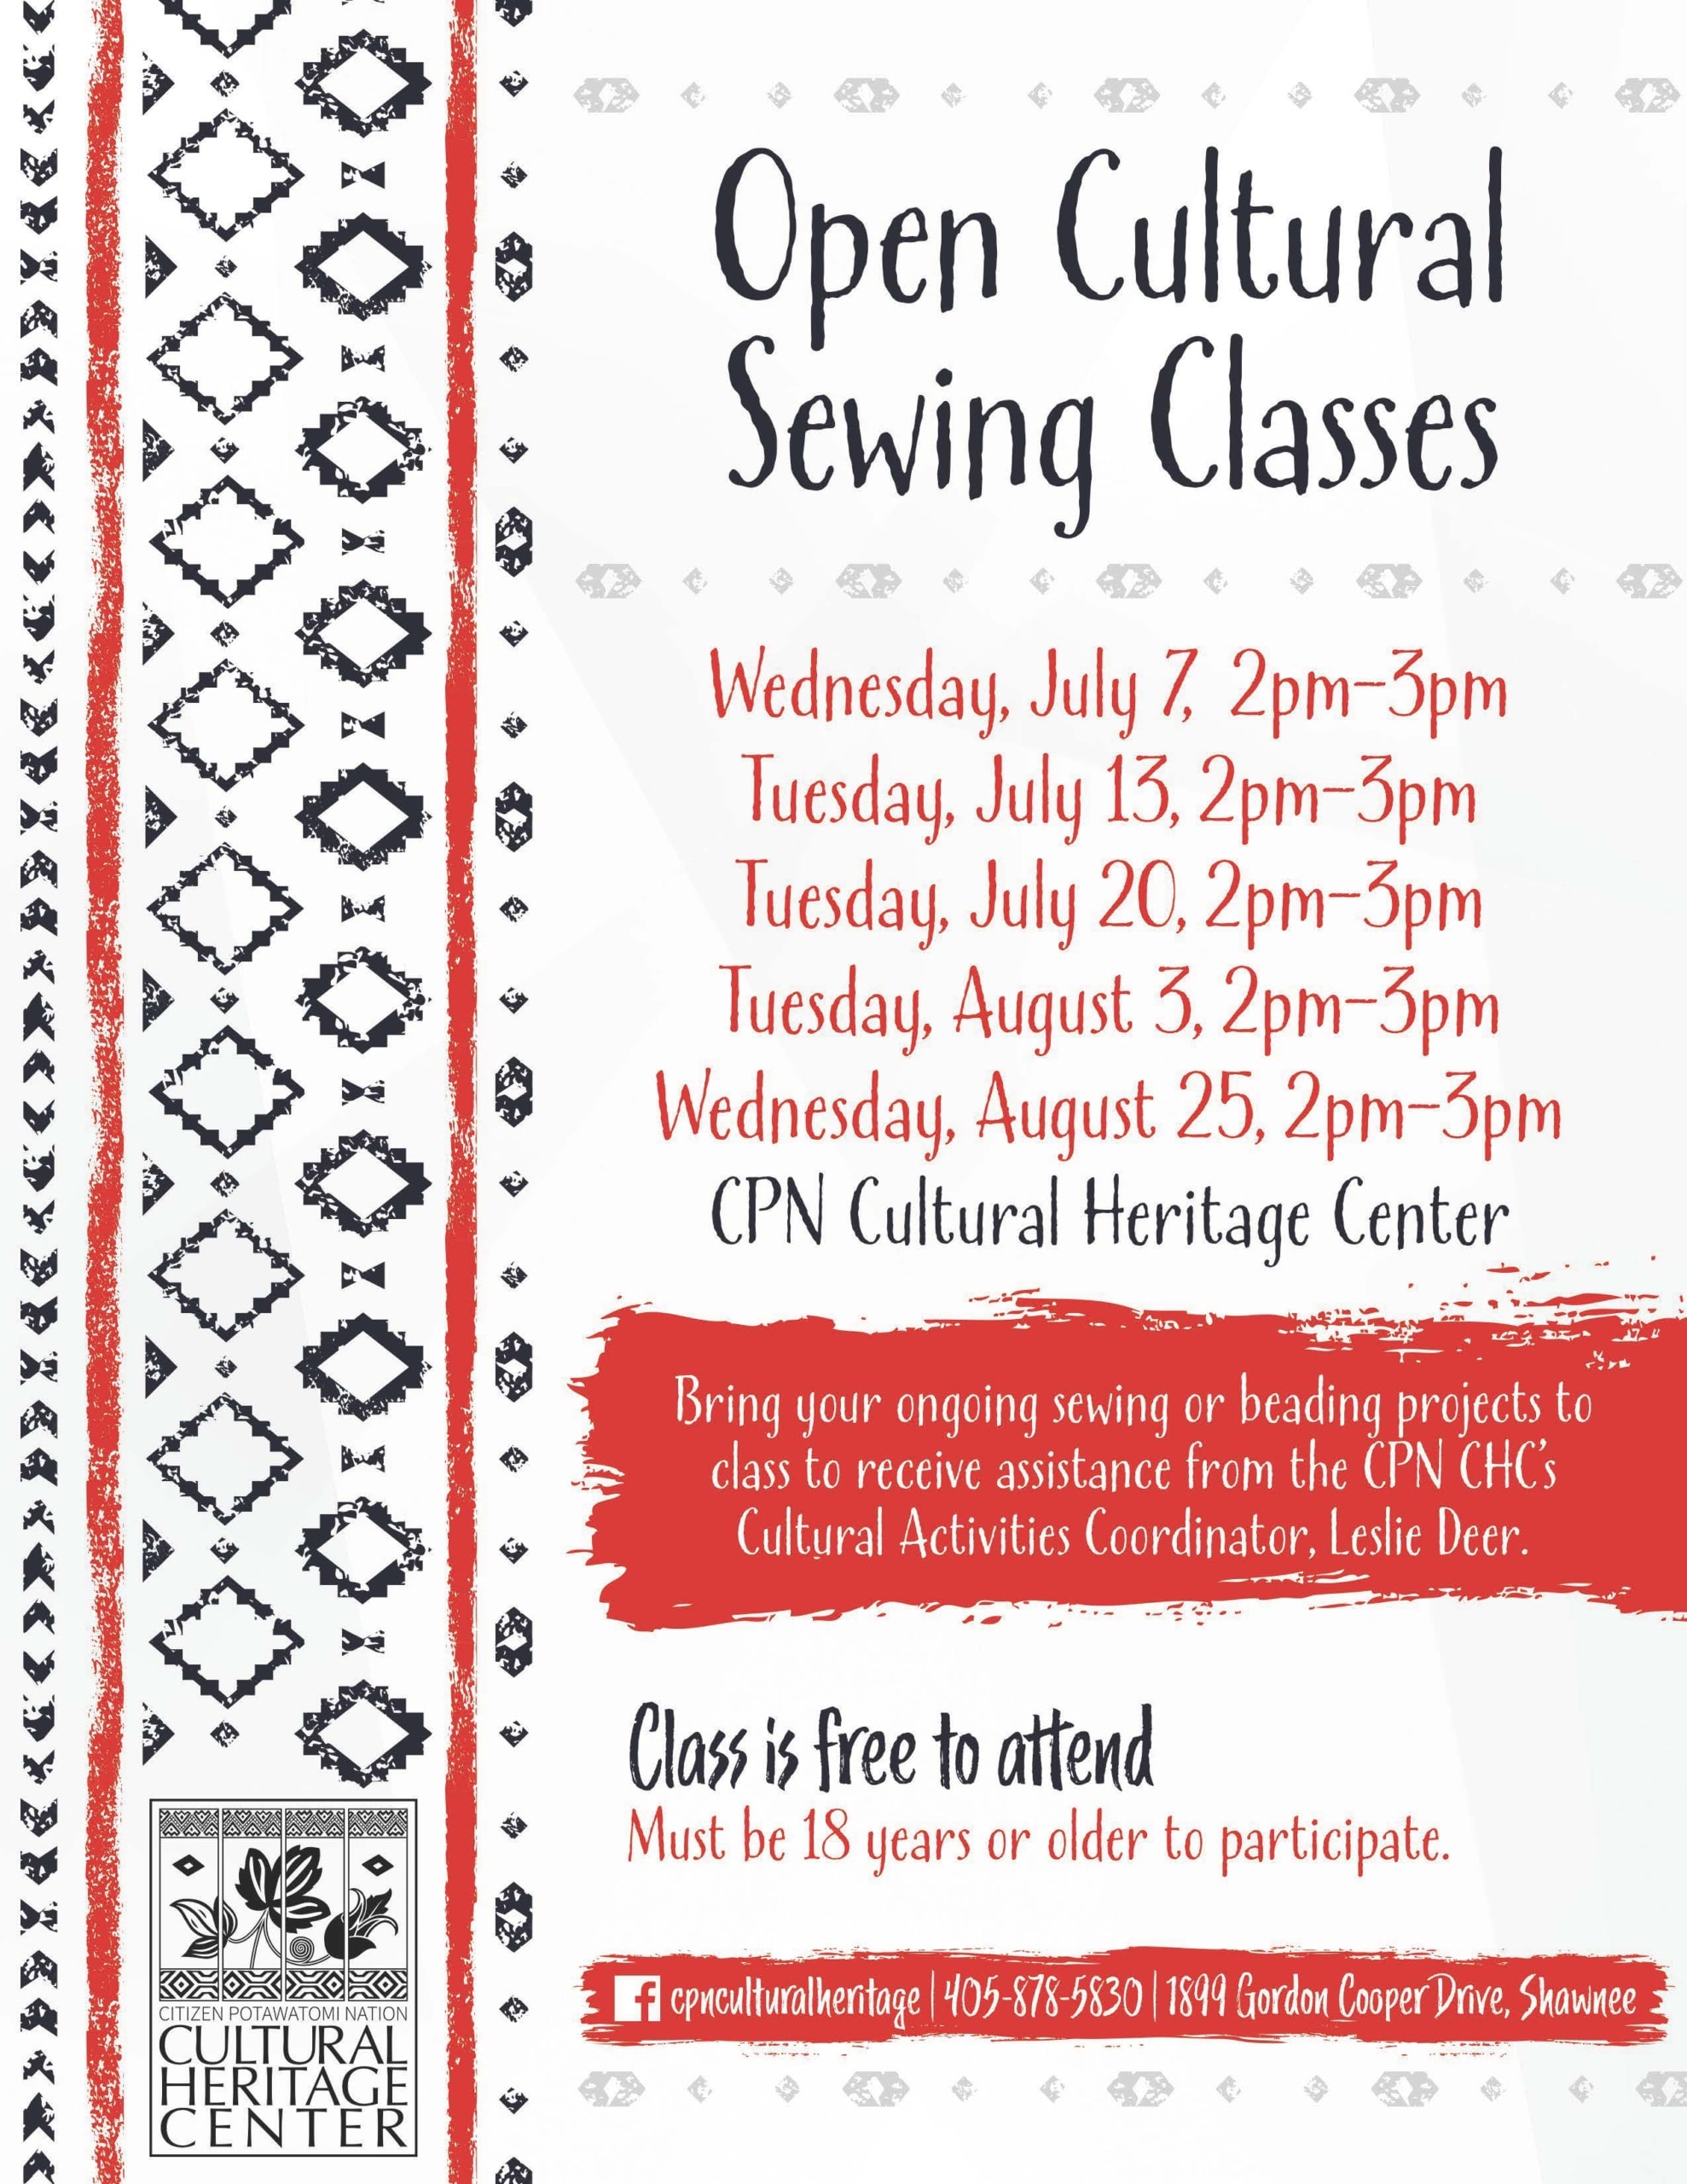 Get assistance on sewing and beading projects during the Open Cultural Sewing Class